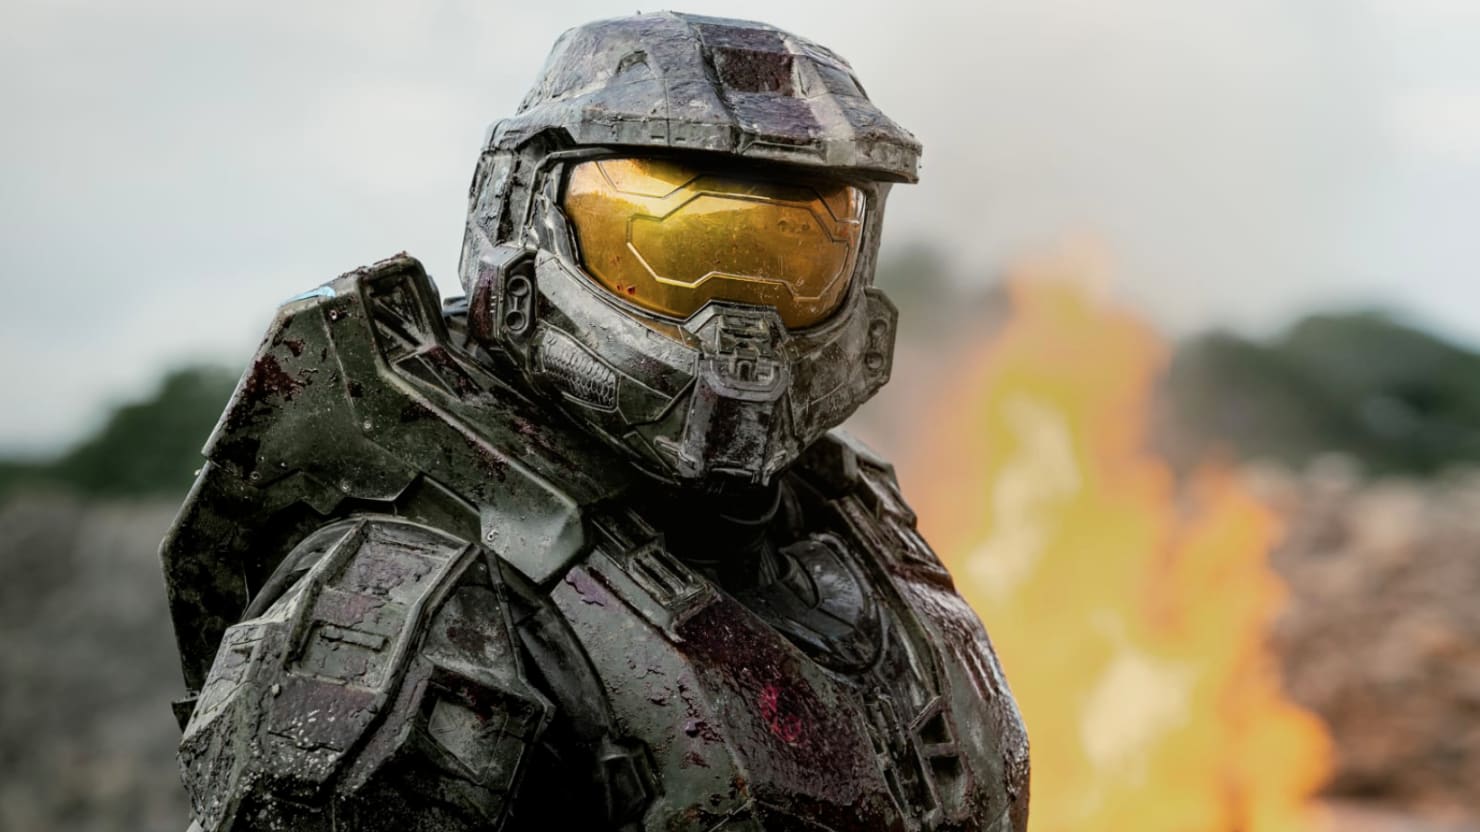 How to watch 'Halo,' the new streaming series - CBS News